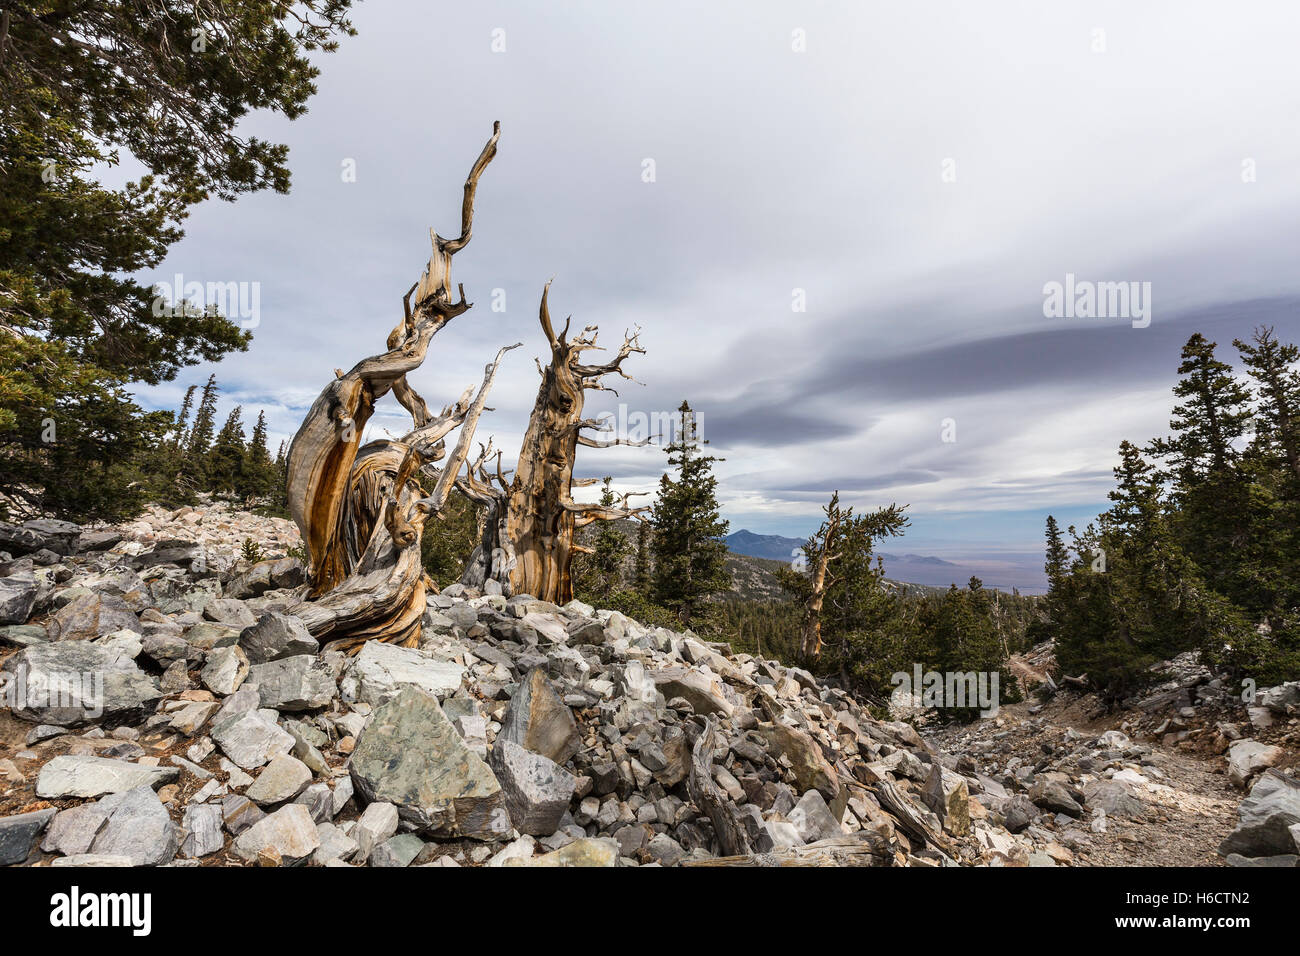 Bristlecone Pines in Great Basin National Park in Northern Nevada.  Bristlecone Pines are the oldest trees in the world. Stock Photo